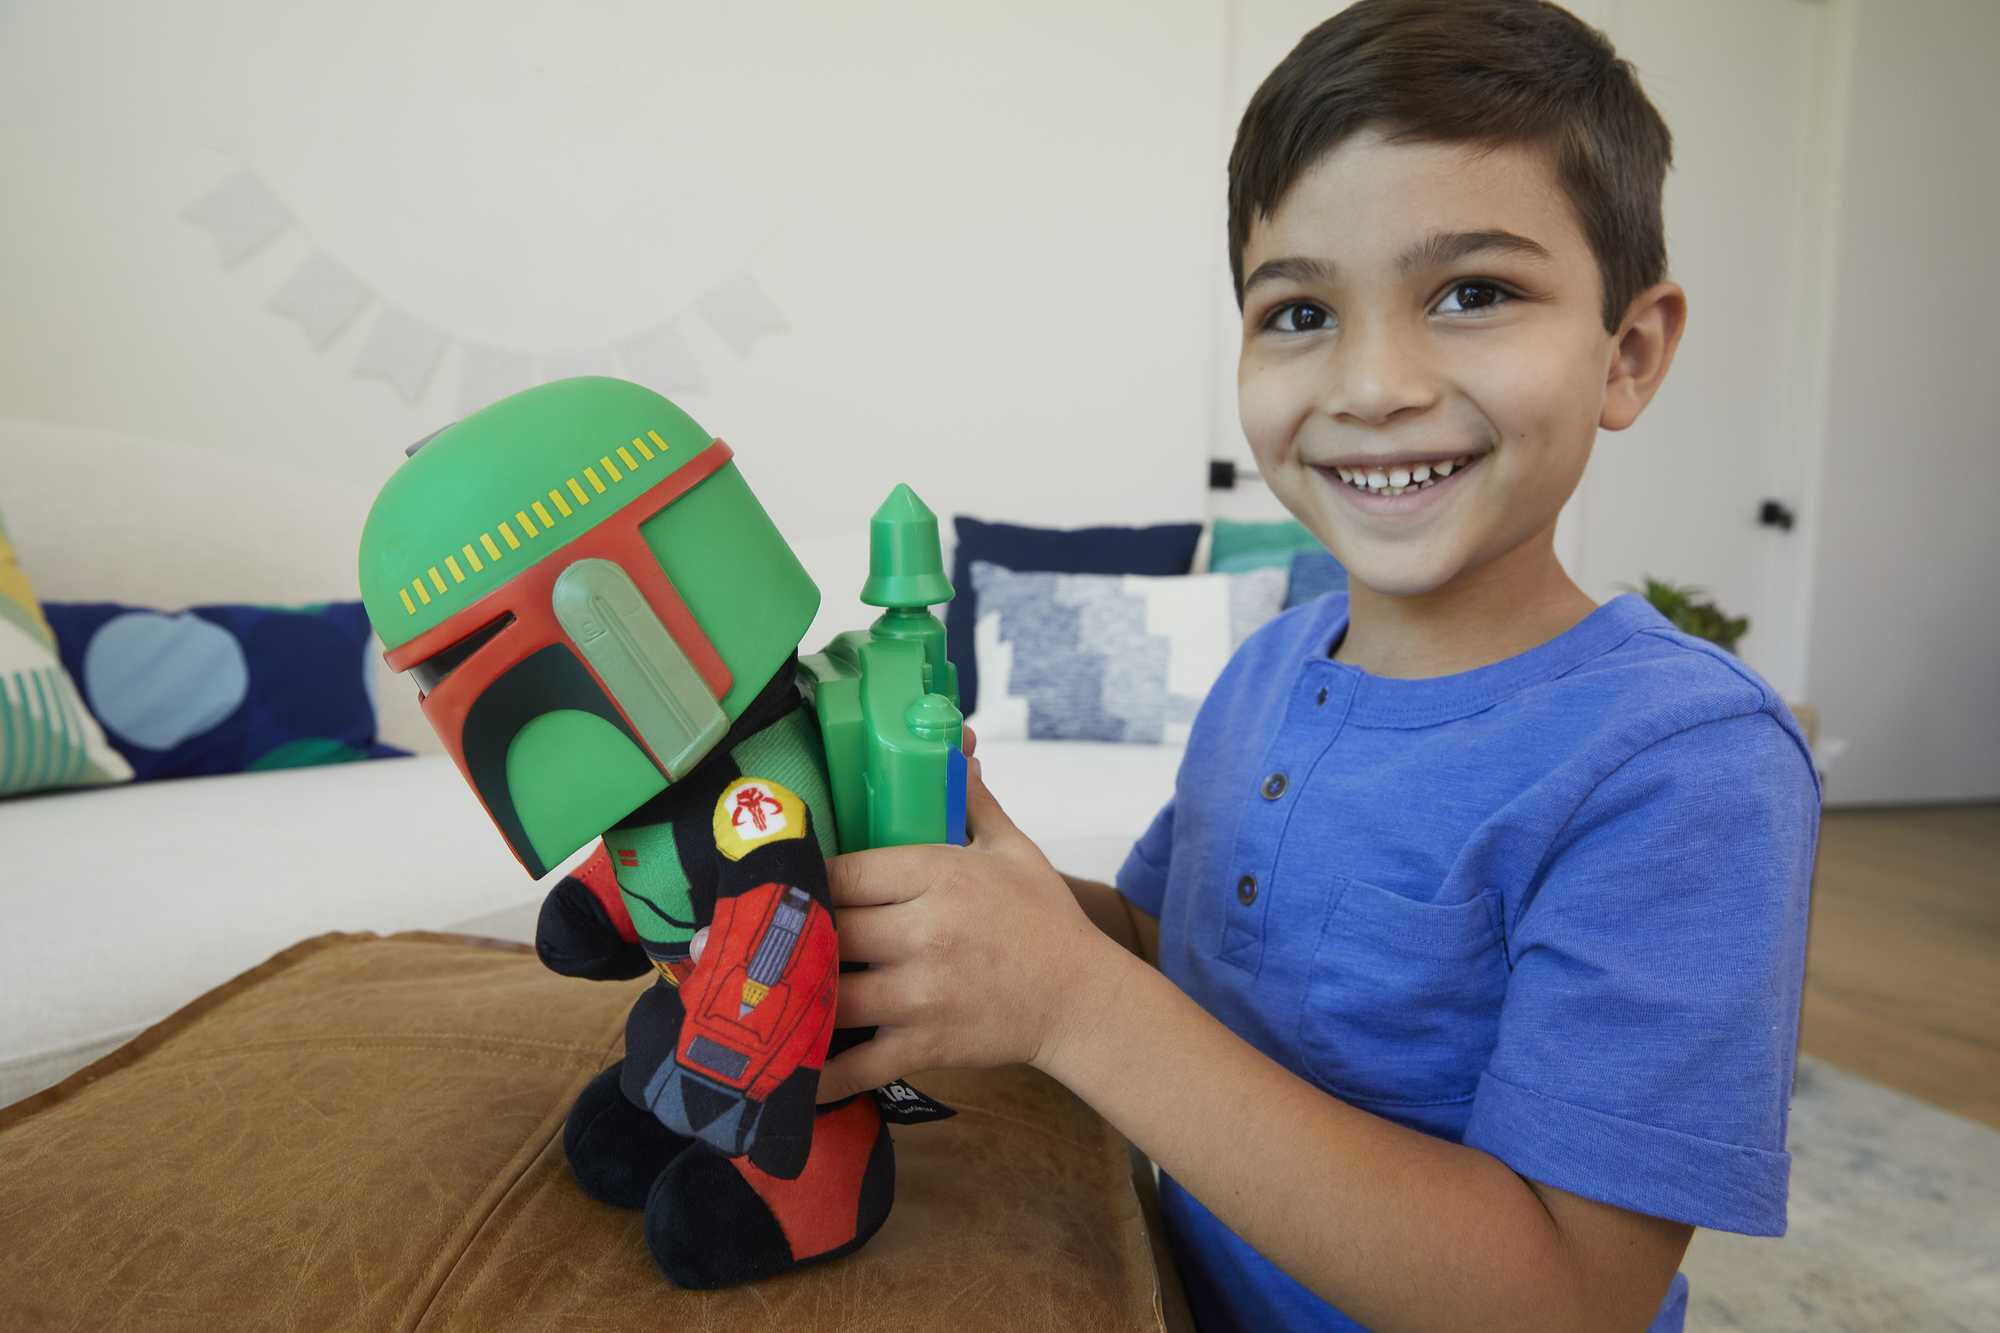 Star Wars Boba Fett Voice Cloner 12" Feature Plush with Air-Powered Soft Rocket Launcher - image 2 of 6